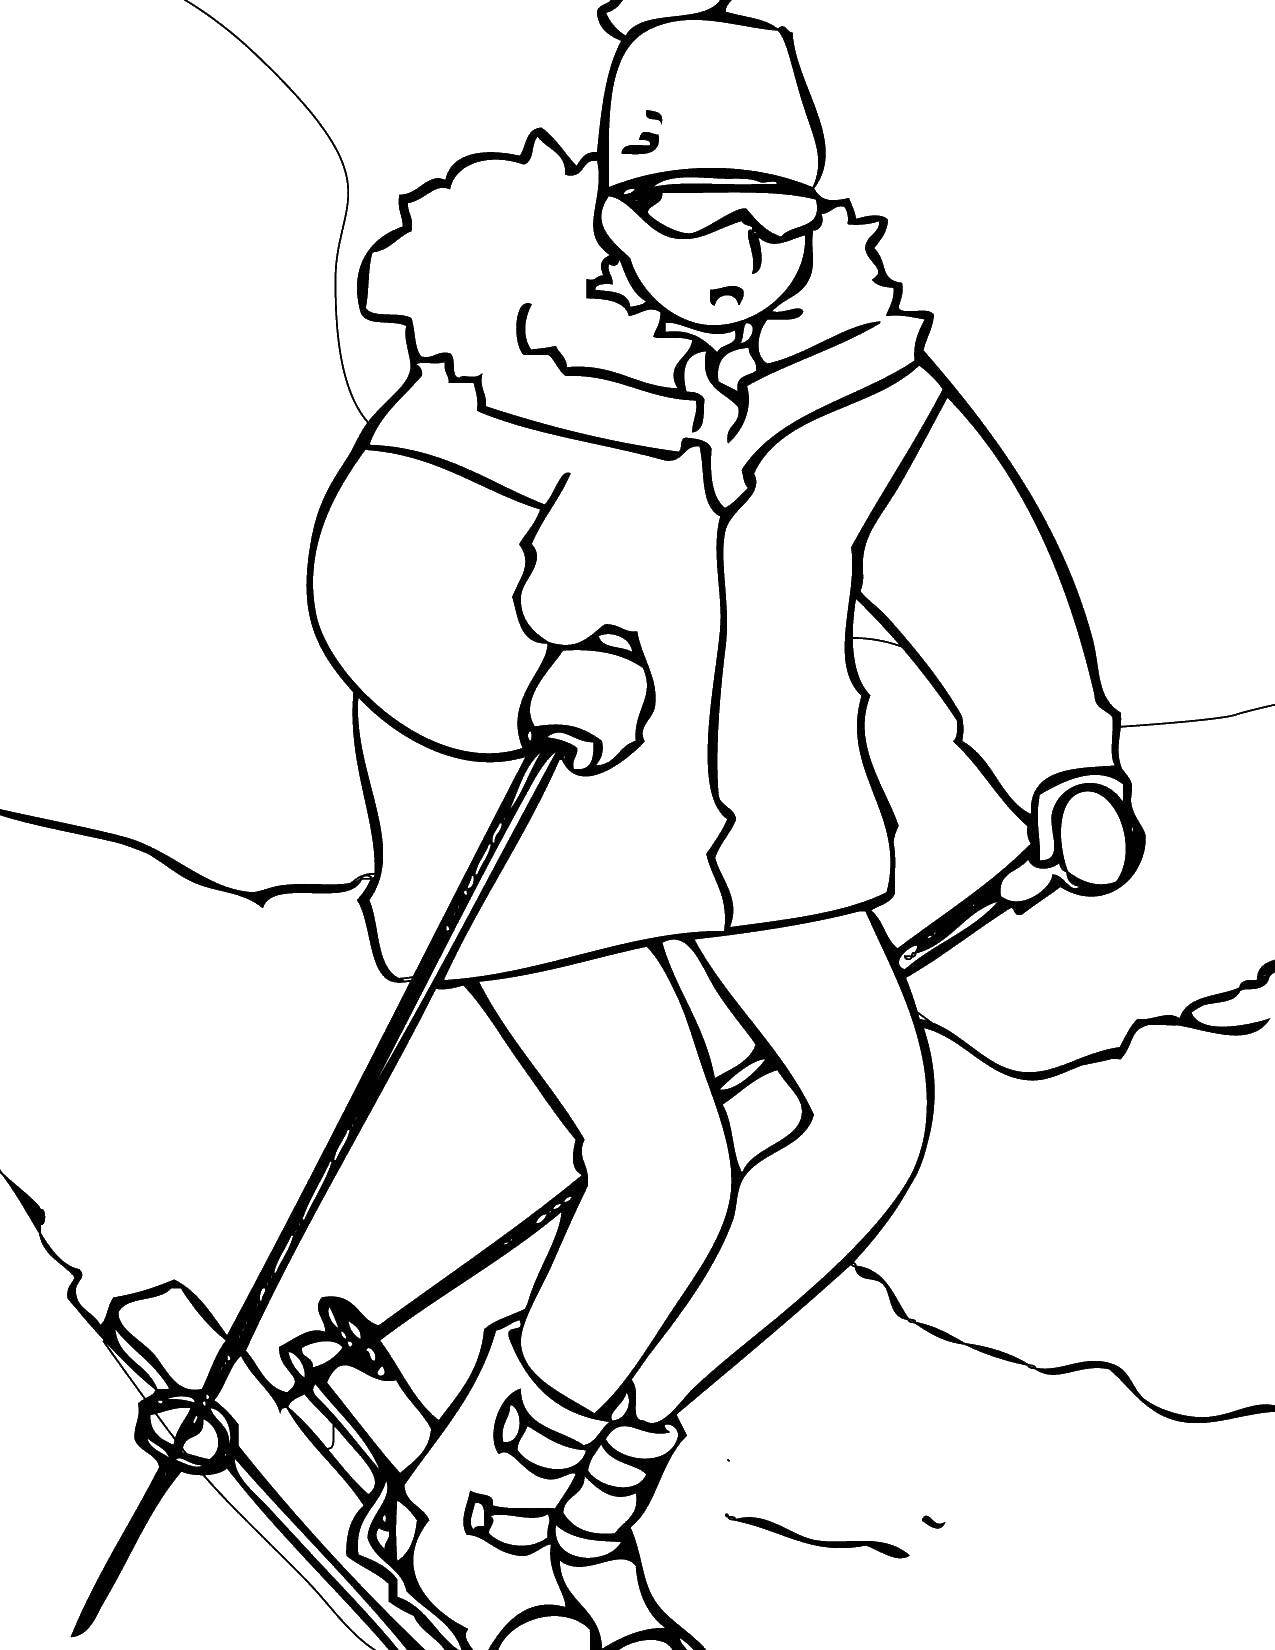 Coloring Skier skiing. Category Sports. Tags:  Sports, skiing.